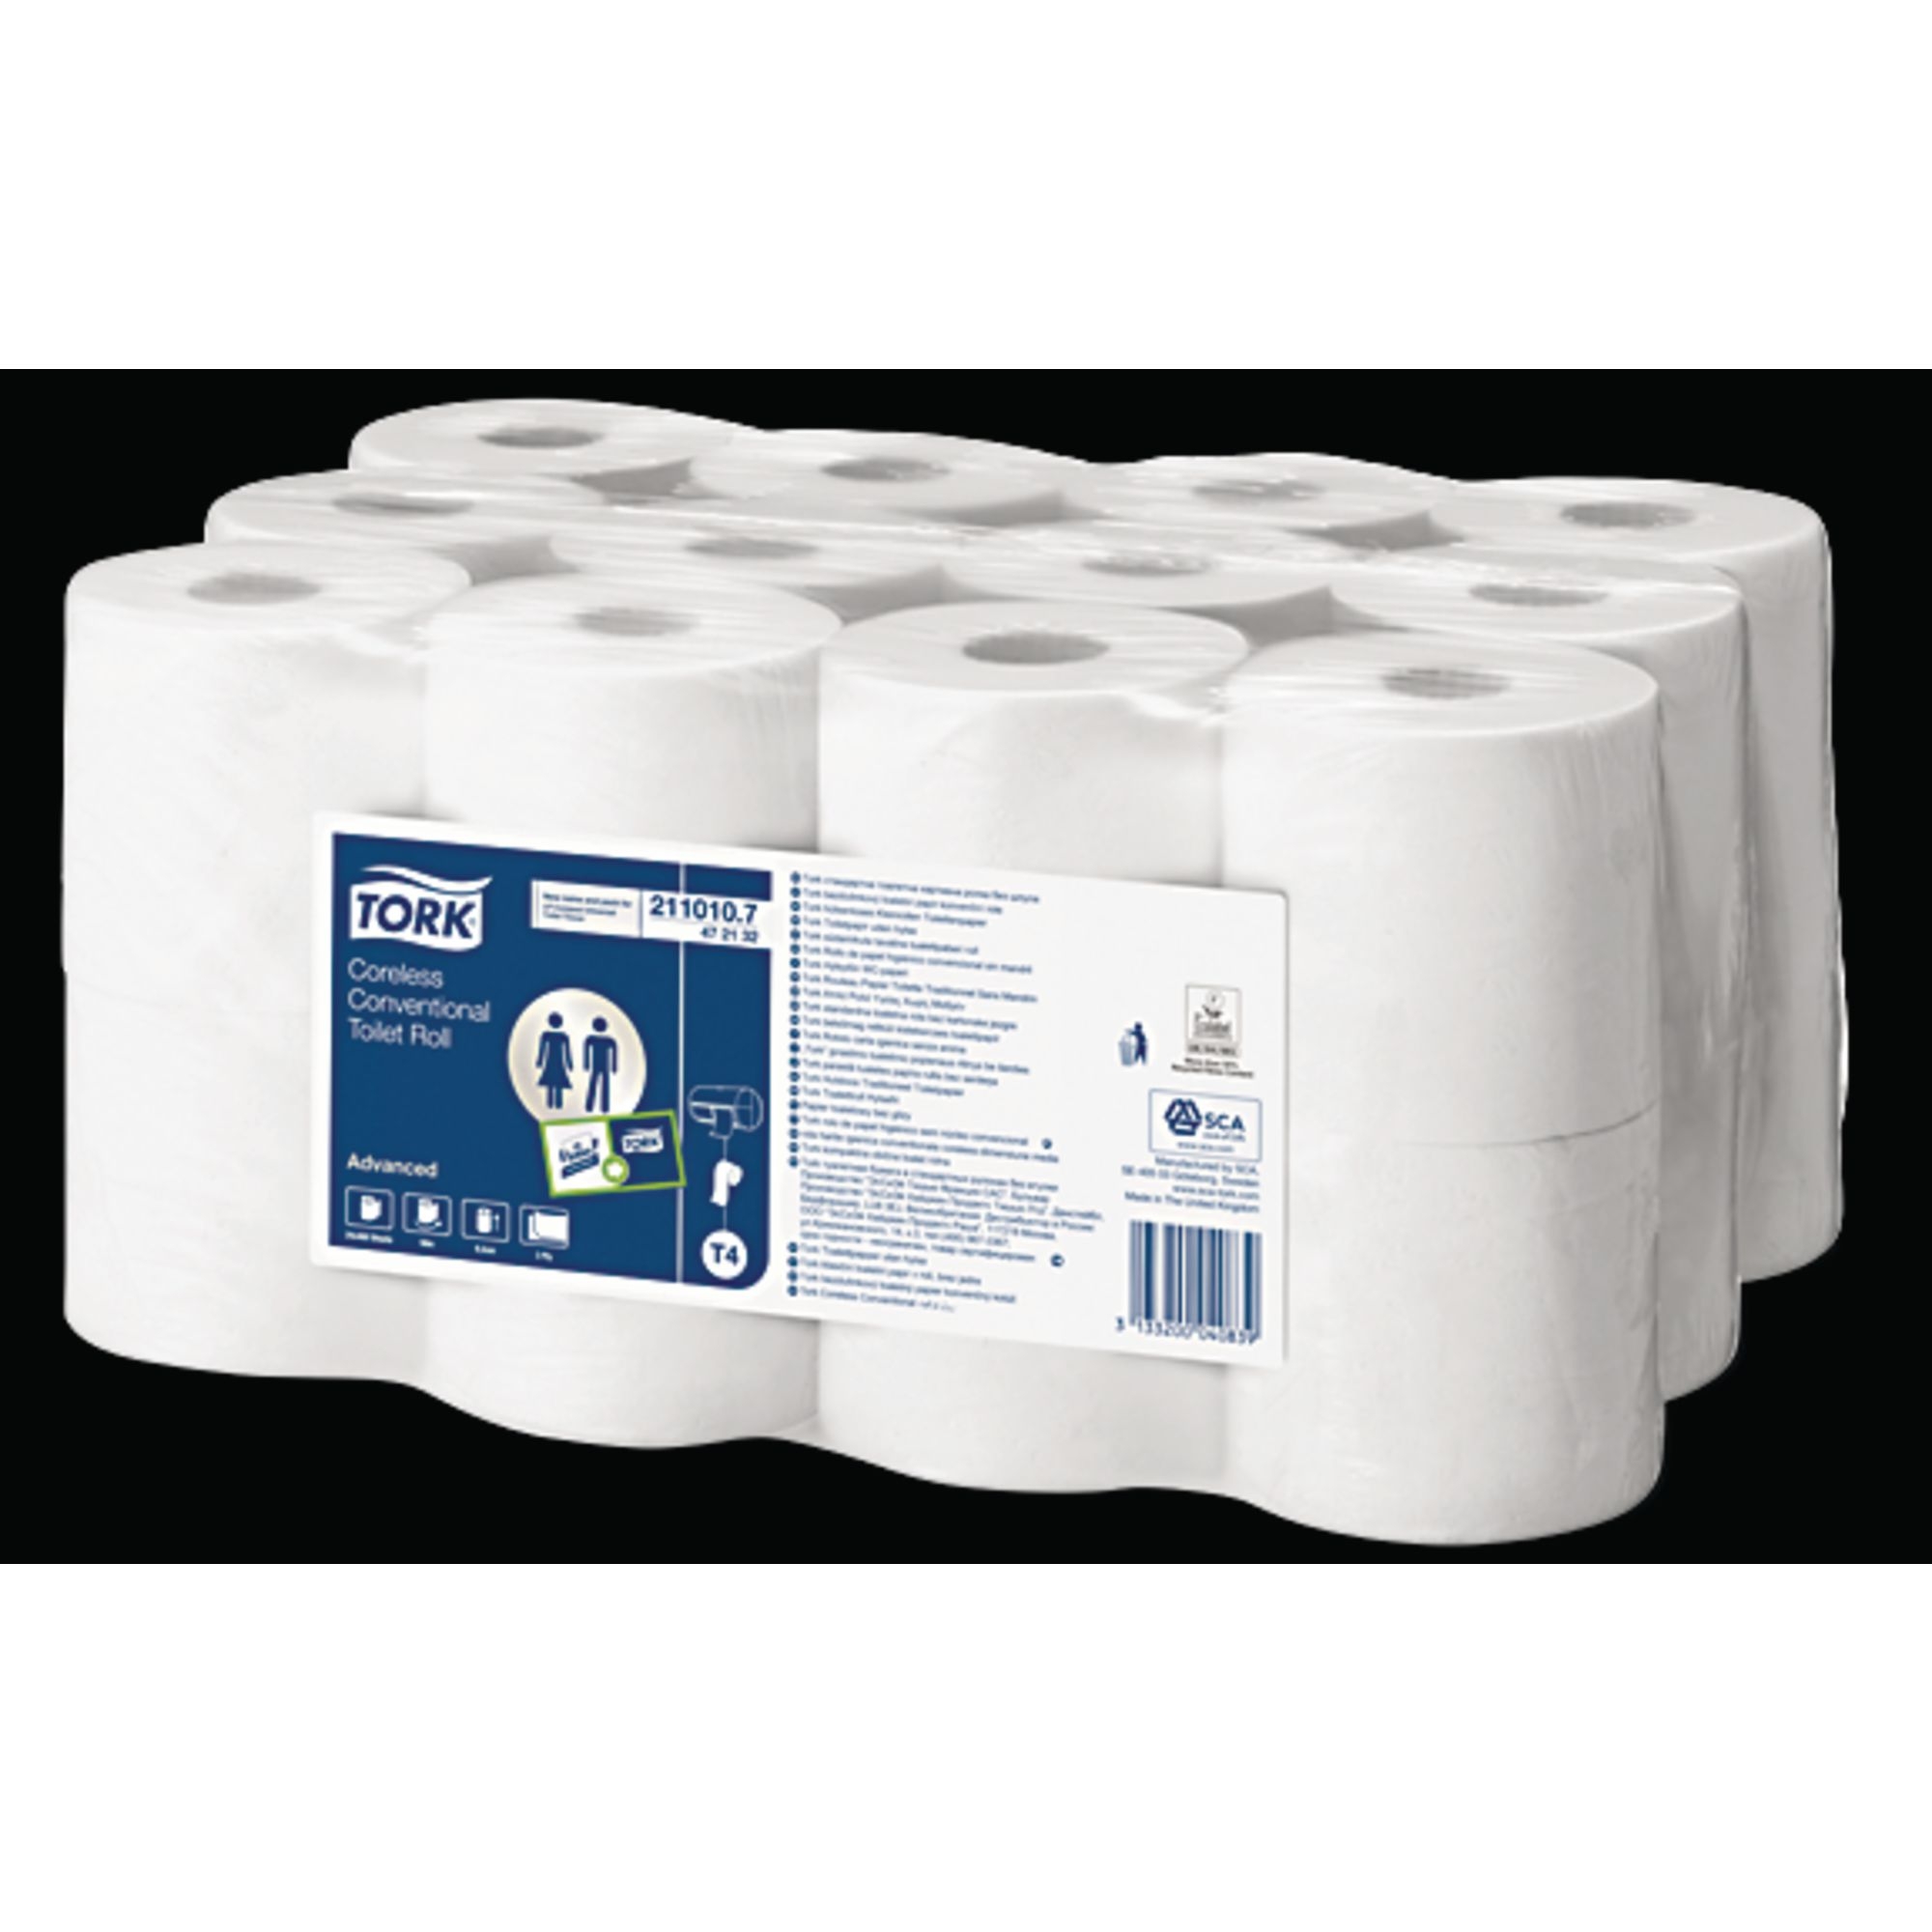 Tork Conventional Toilet Roll 2 Ply 400 Sheet 47 21 32